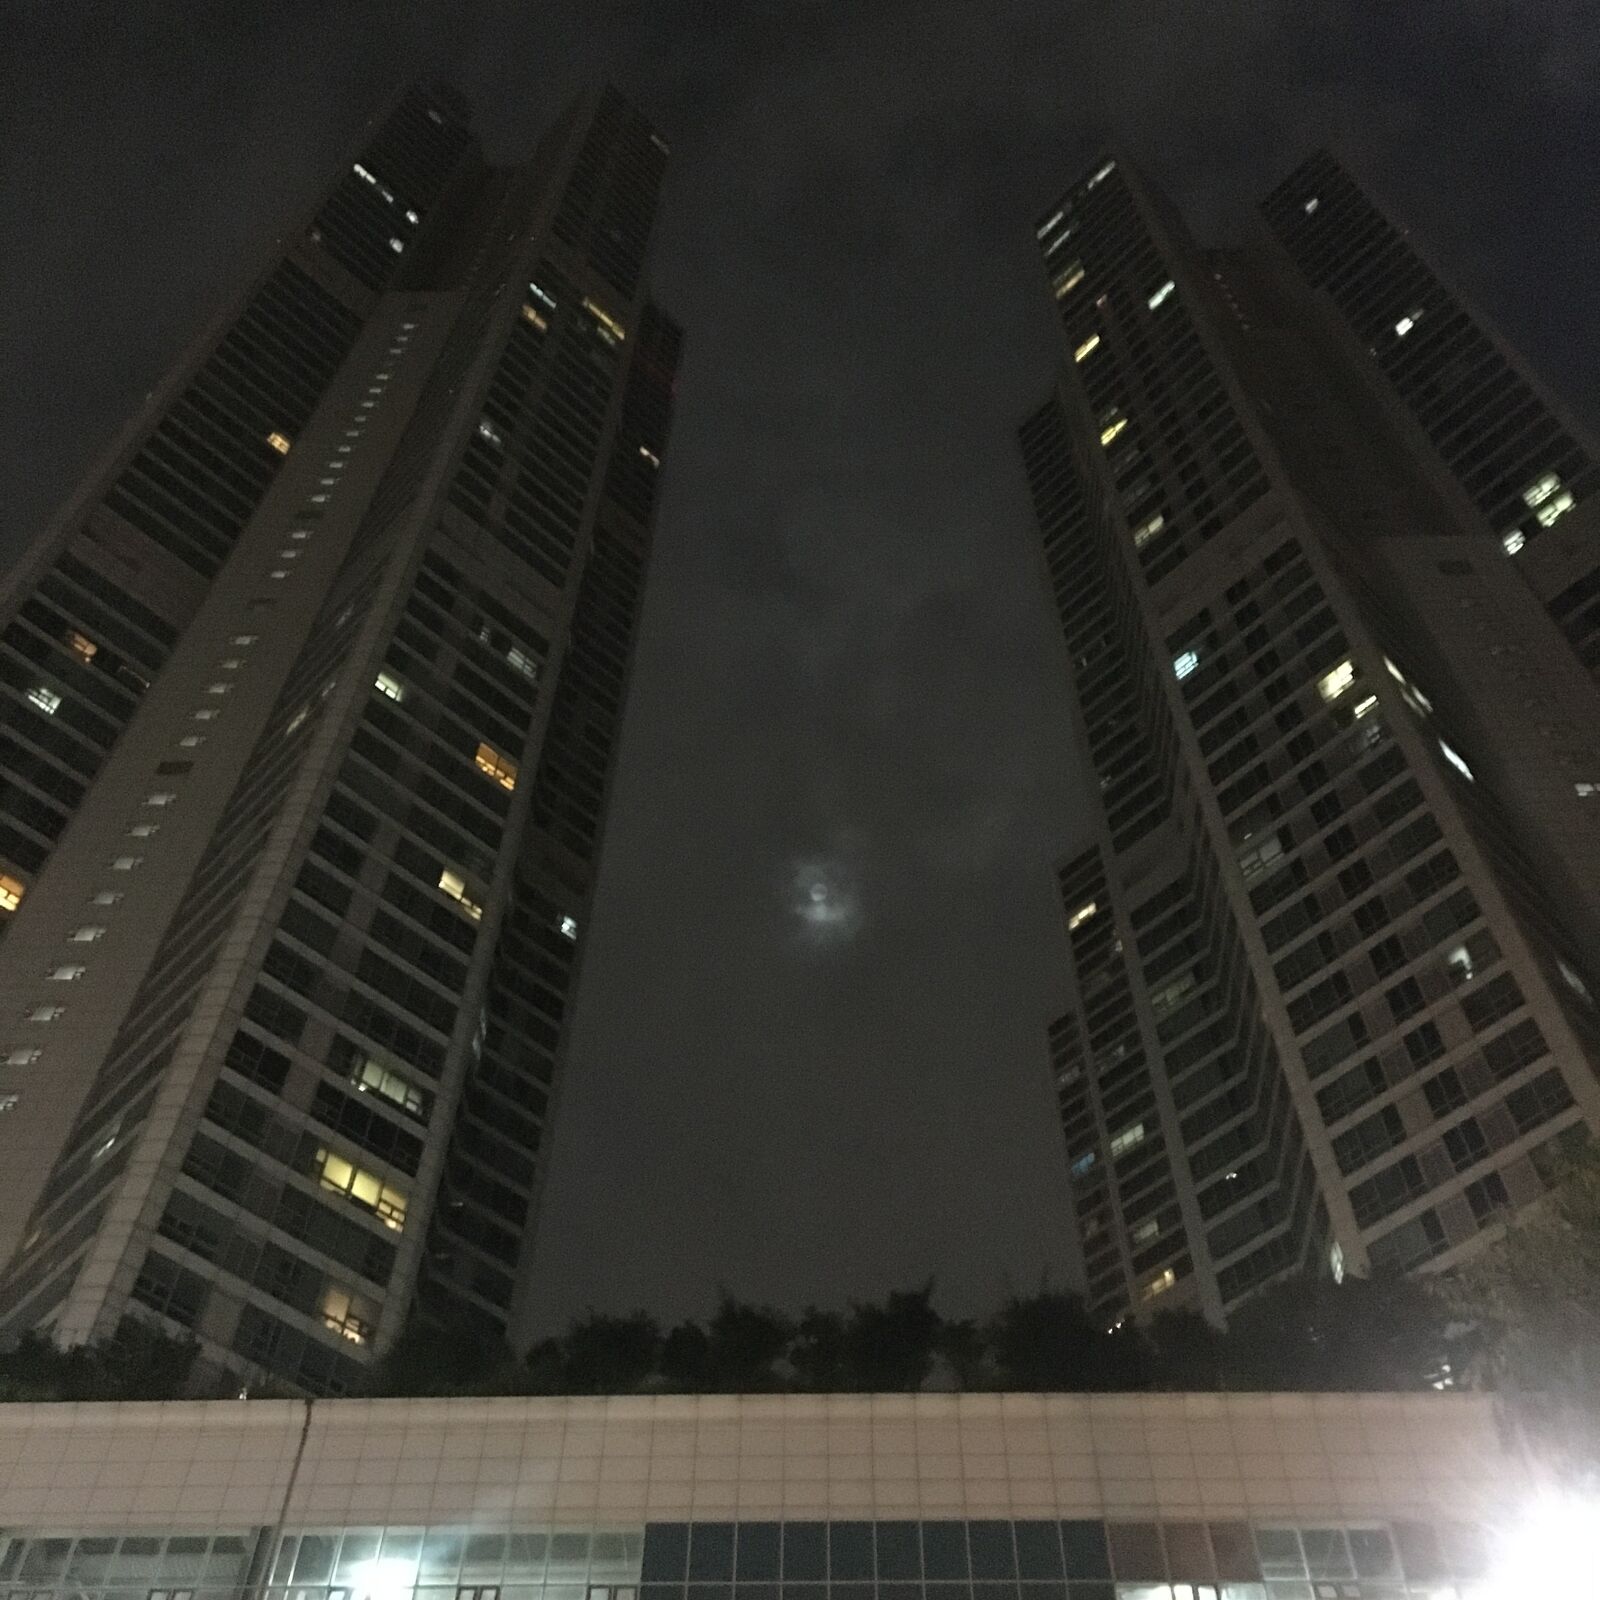 Apple iPhone 6s + iPhone 6s back camera 4.15mm f/2.2 sample photo. Photoshop, apartments, night view photography